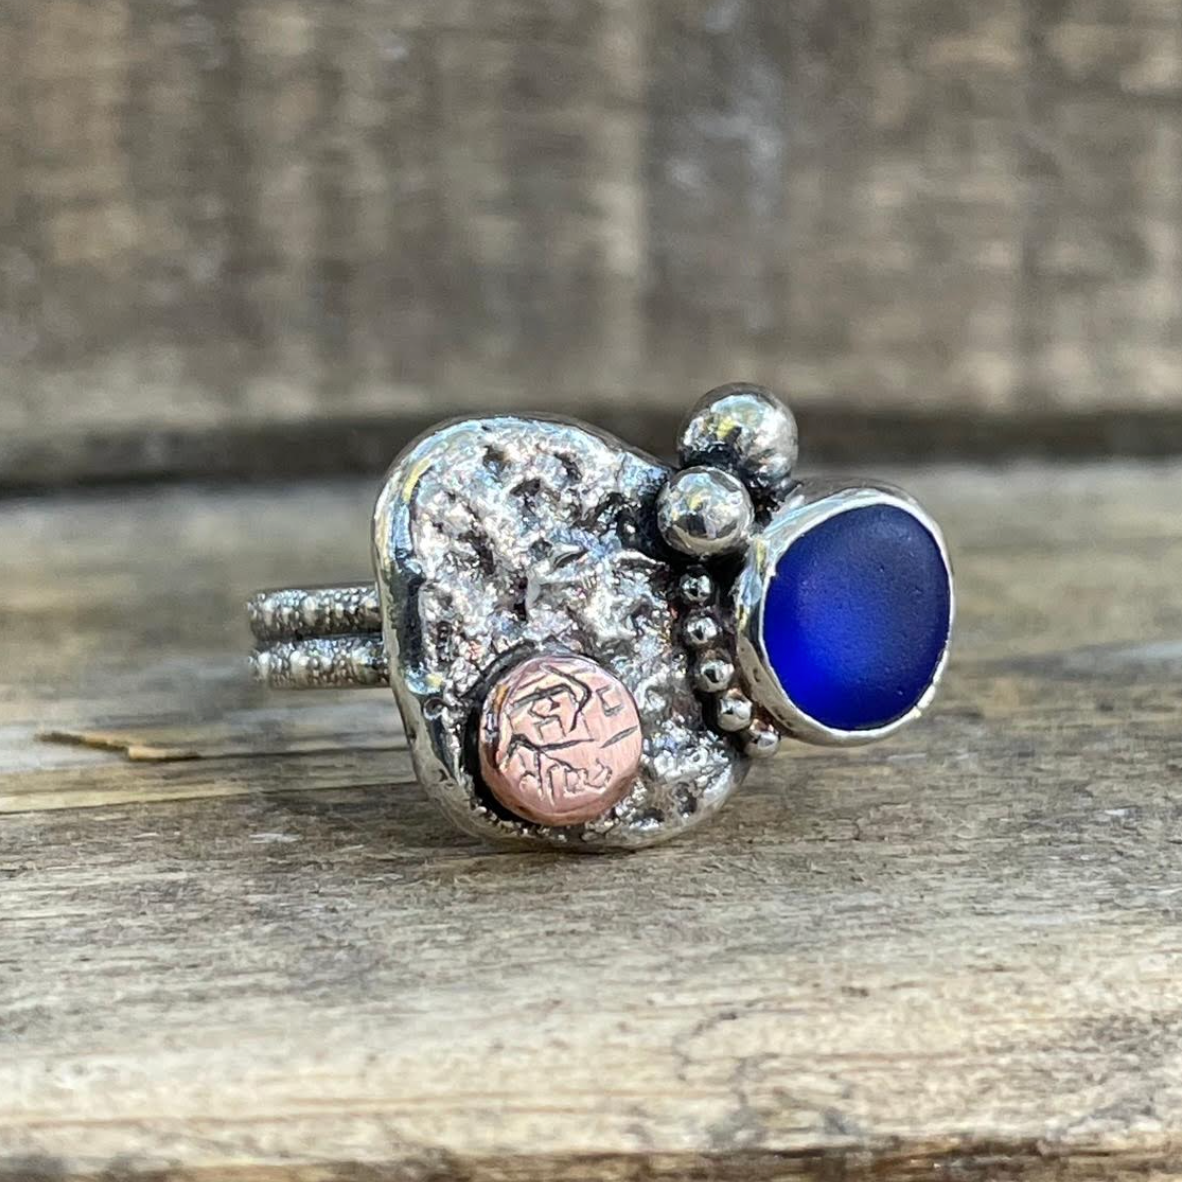 English Cobalt Recycled Silver and Copper Ring Size 7 by Shoreline Angel (R2063)